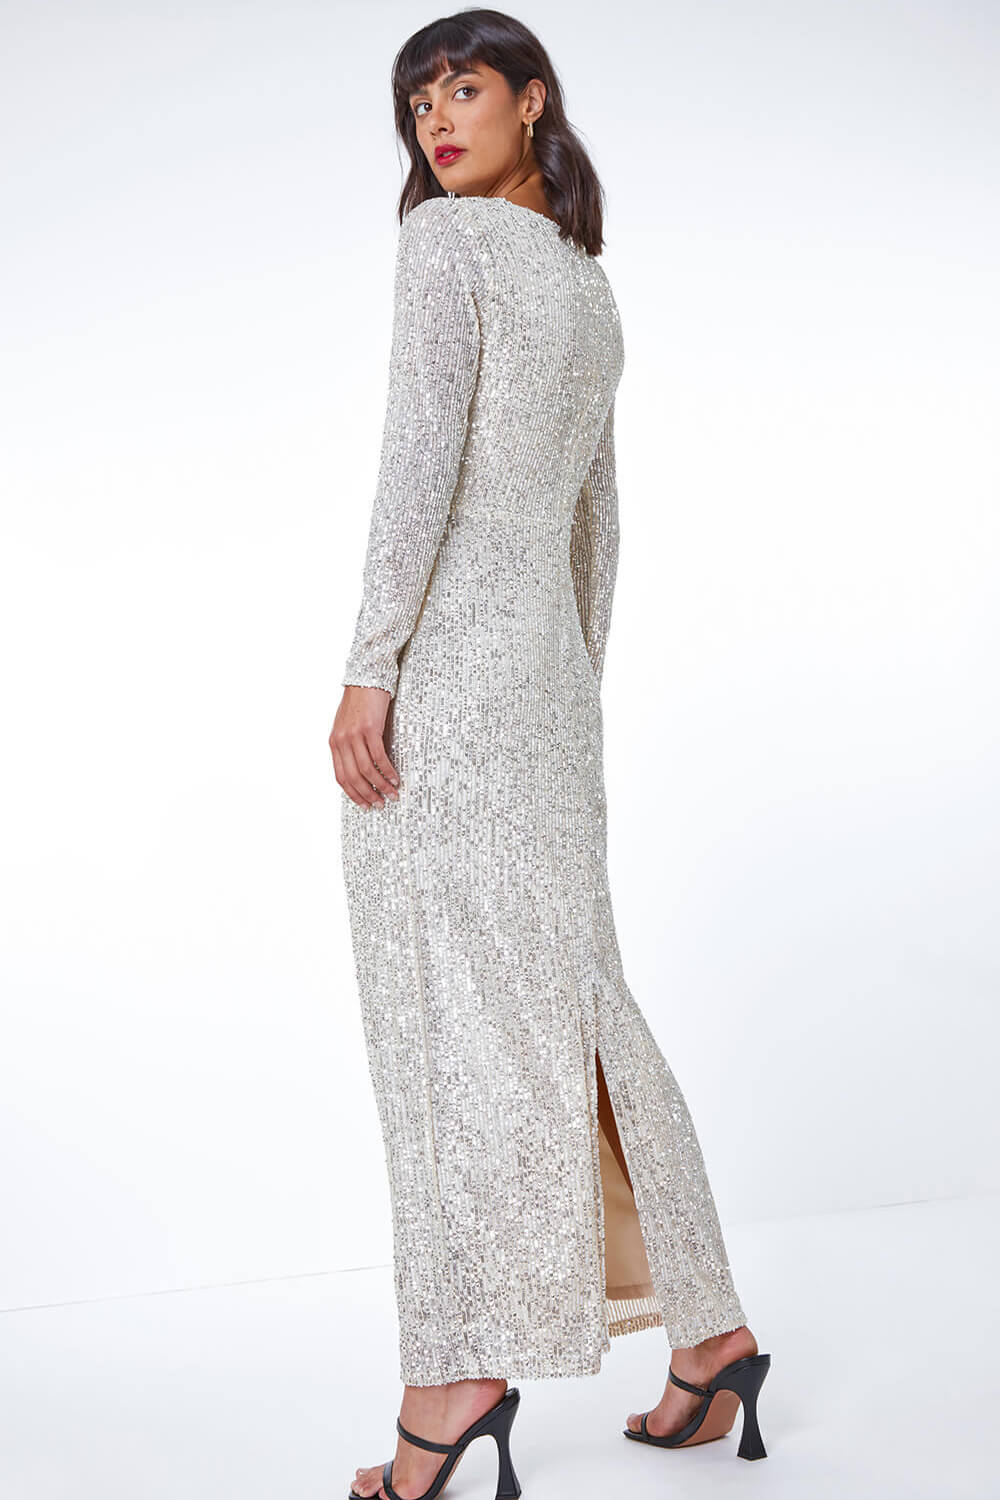 Silver Sequin Wrap Stretch Maxi Dress, Image 4 of 5